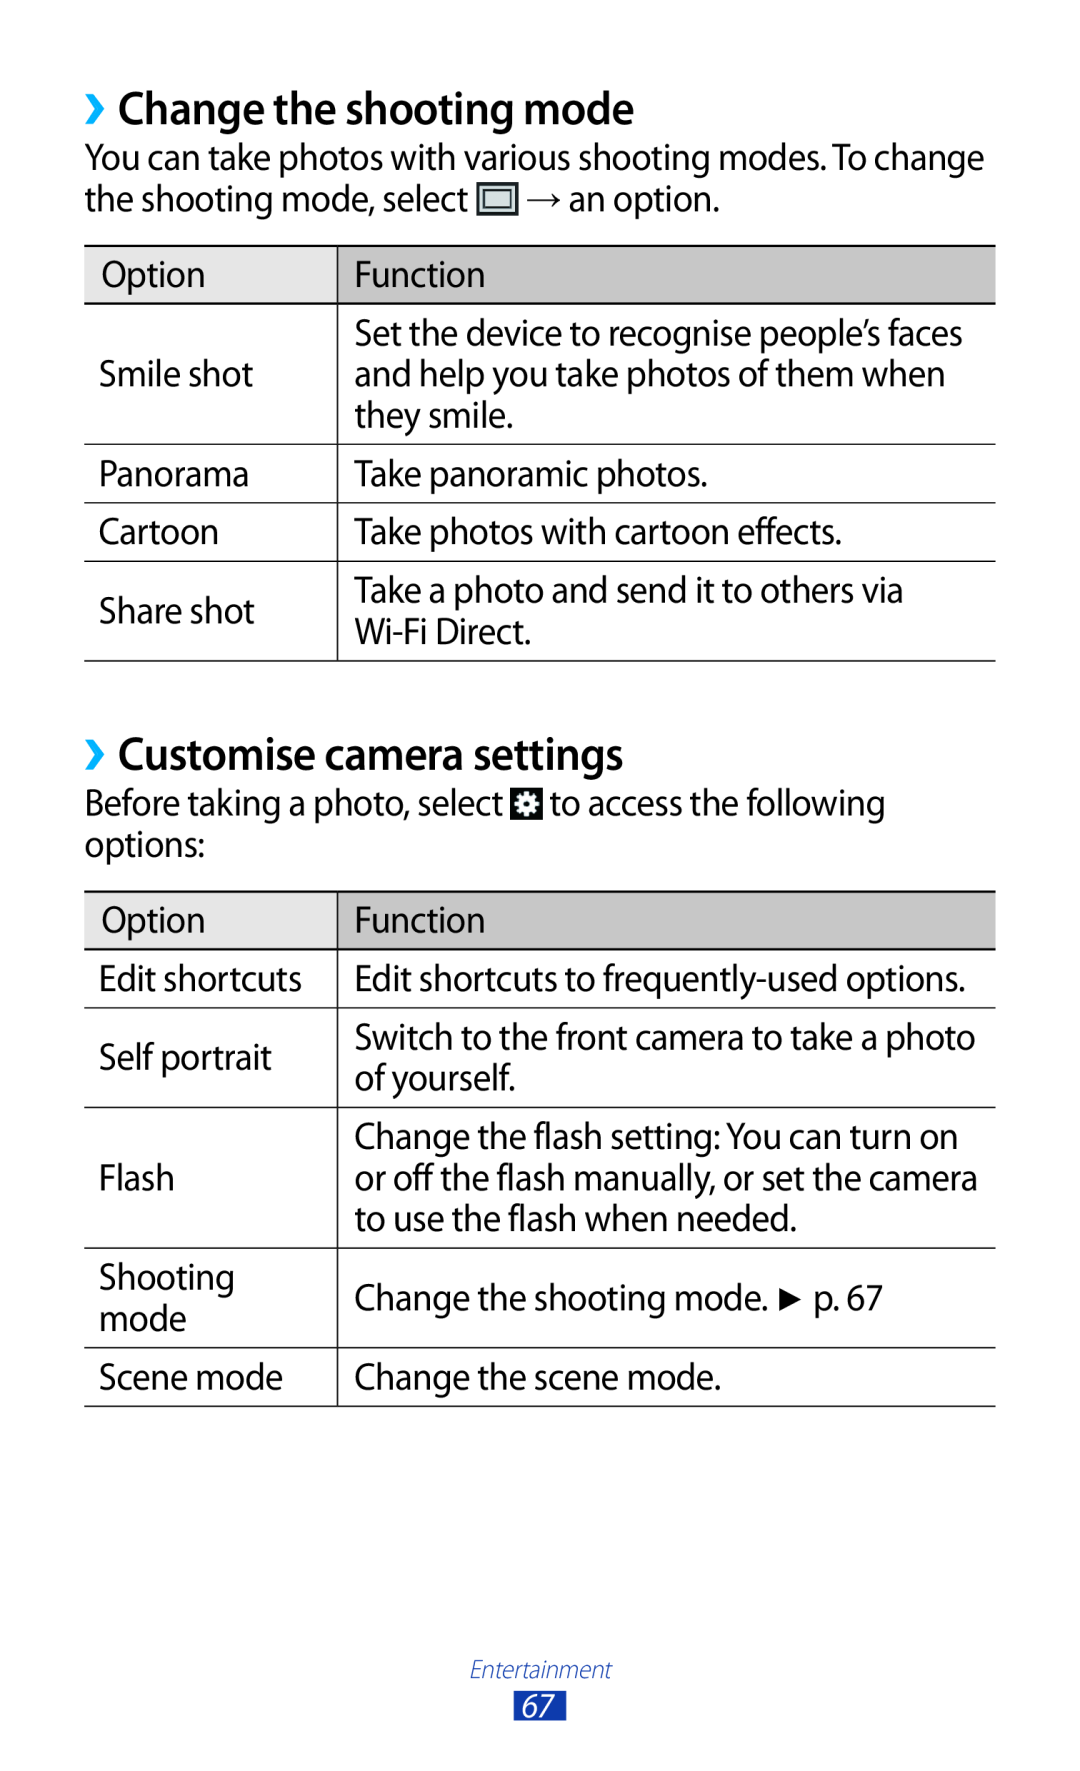 Samsung GT2S7560UWAVDH ››Change the shooting mode, ››Customise camera settings, Edit shortcuts to frequently-used options 